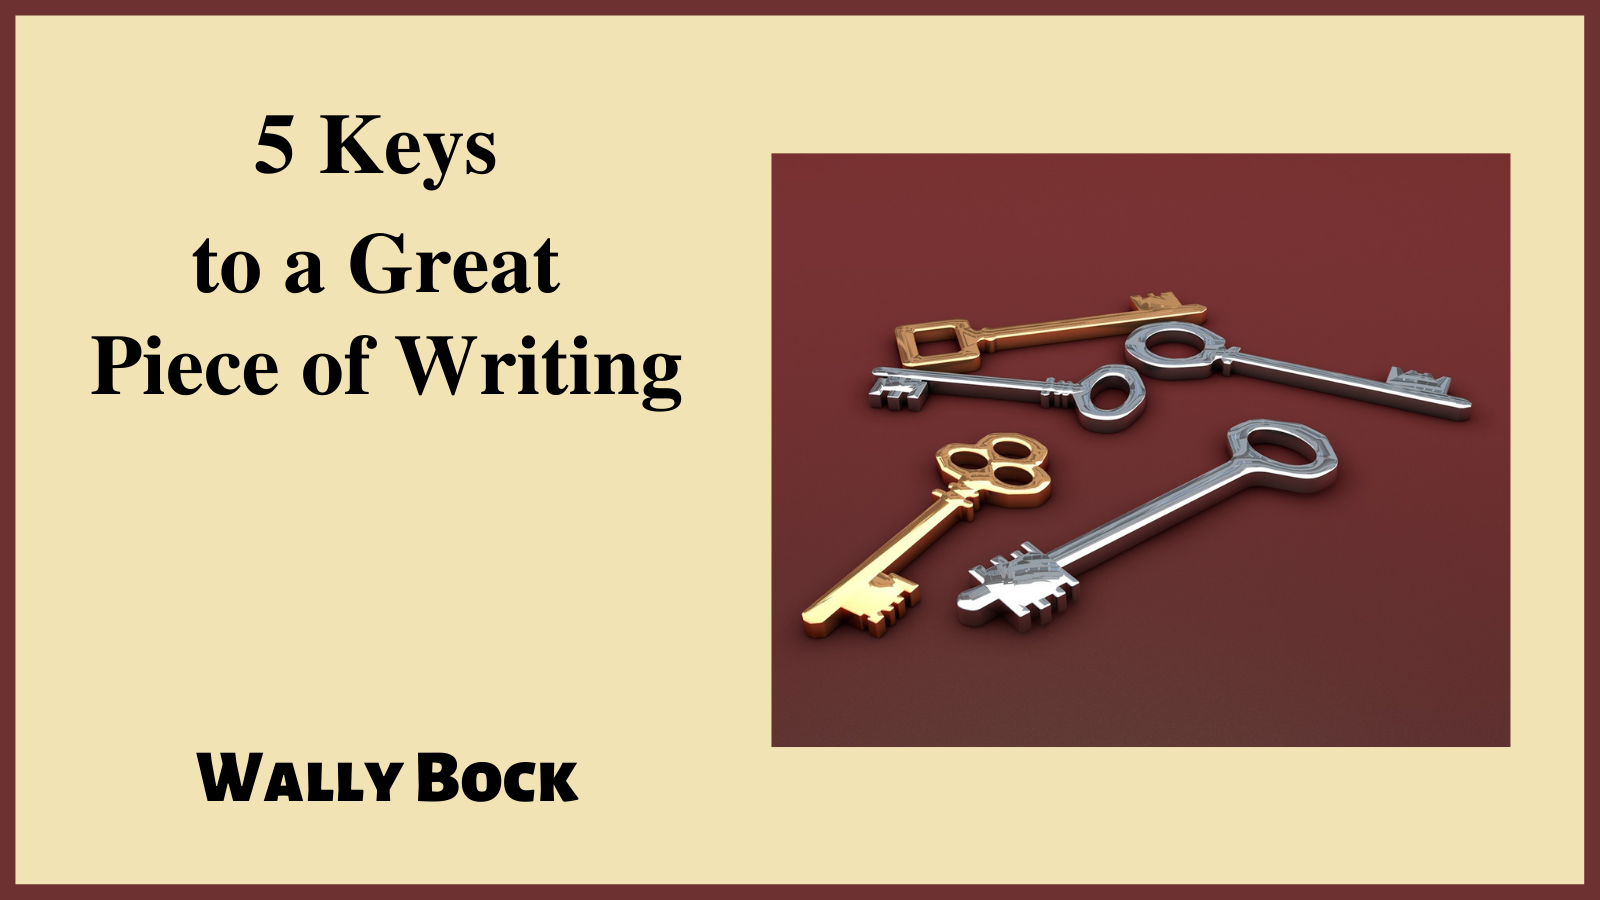 5 Keys to Creating a Great Piece of Writing